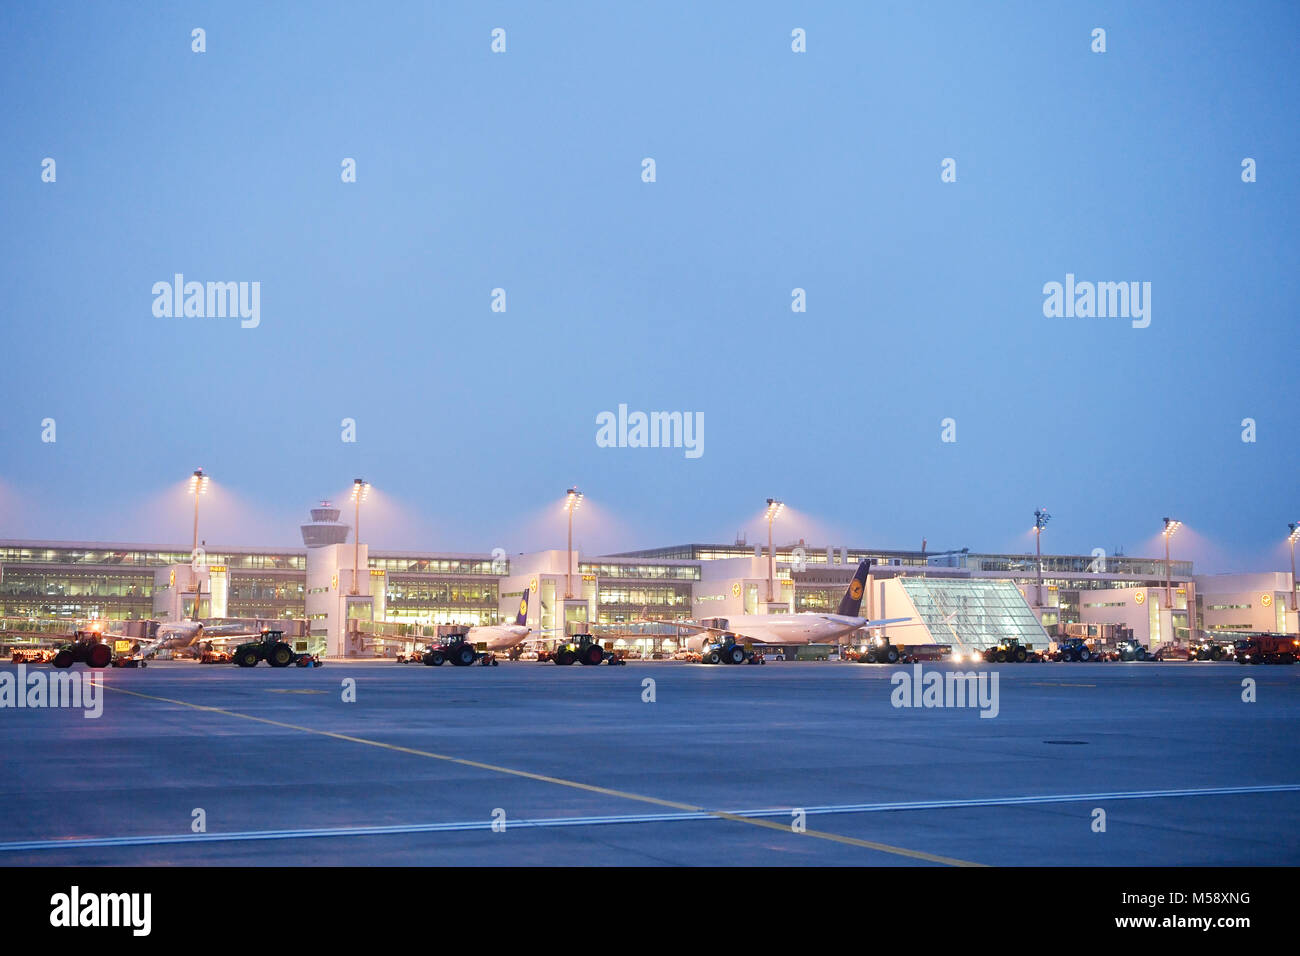 winter, snow, ice, truck, tractor, snow plow, cold, night, blue, Munich, airport, terminal, tower, satellite, terminal 2, muc, Bavaria, Germany Stock Photo